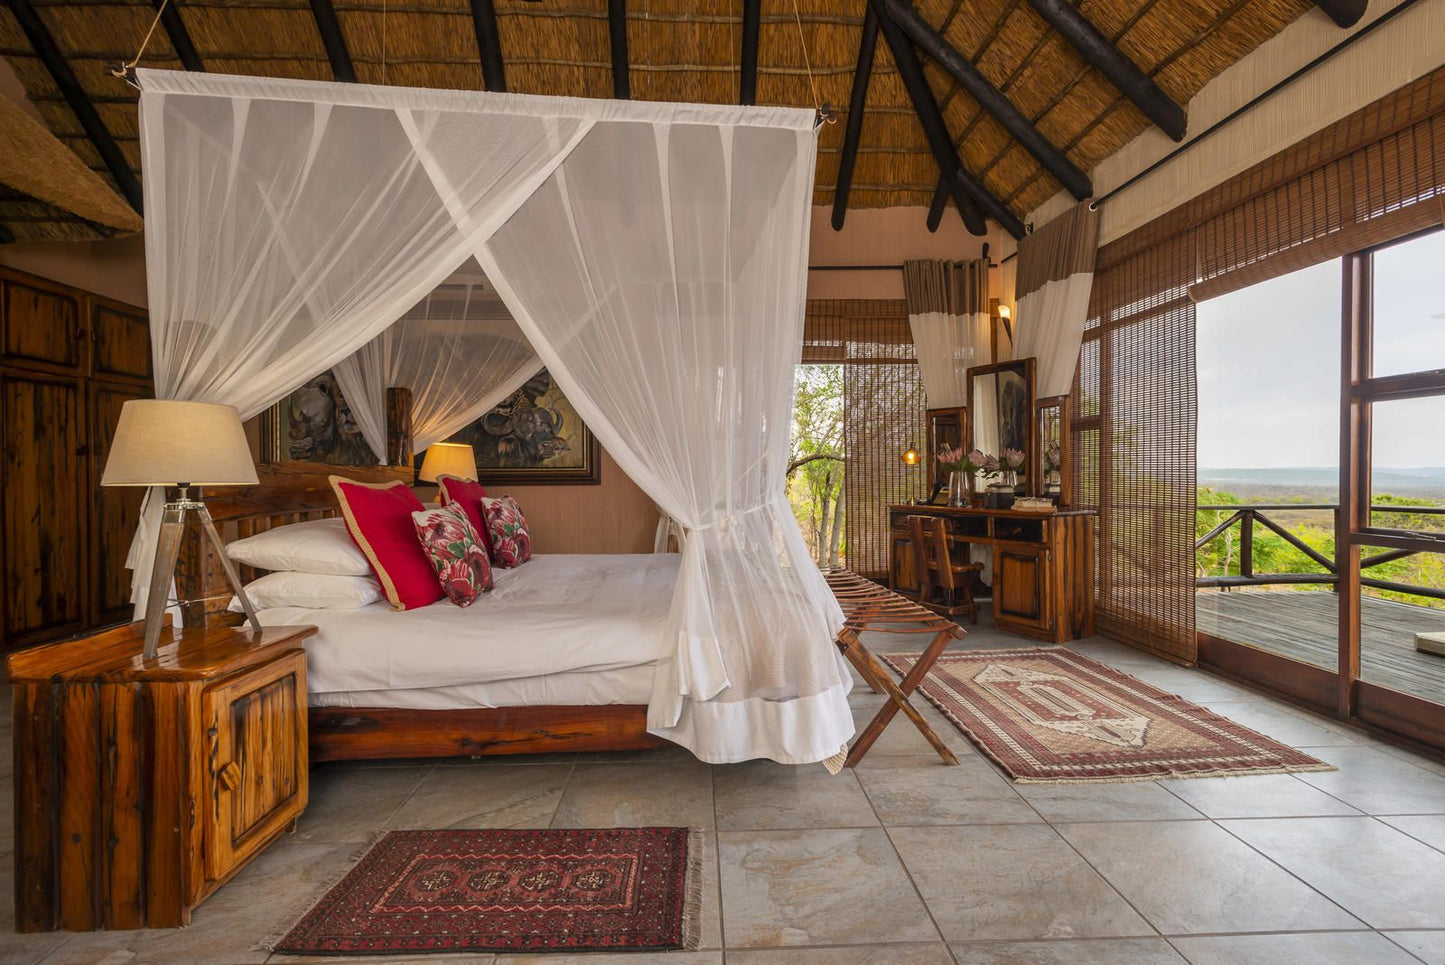 Jamila Game Lodge Vaalwater Limpopo Province South Africa Bedroom